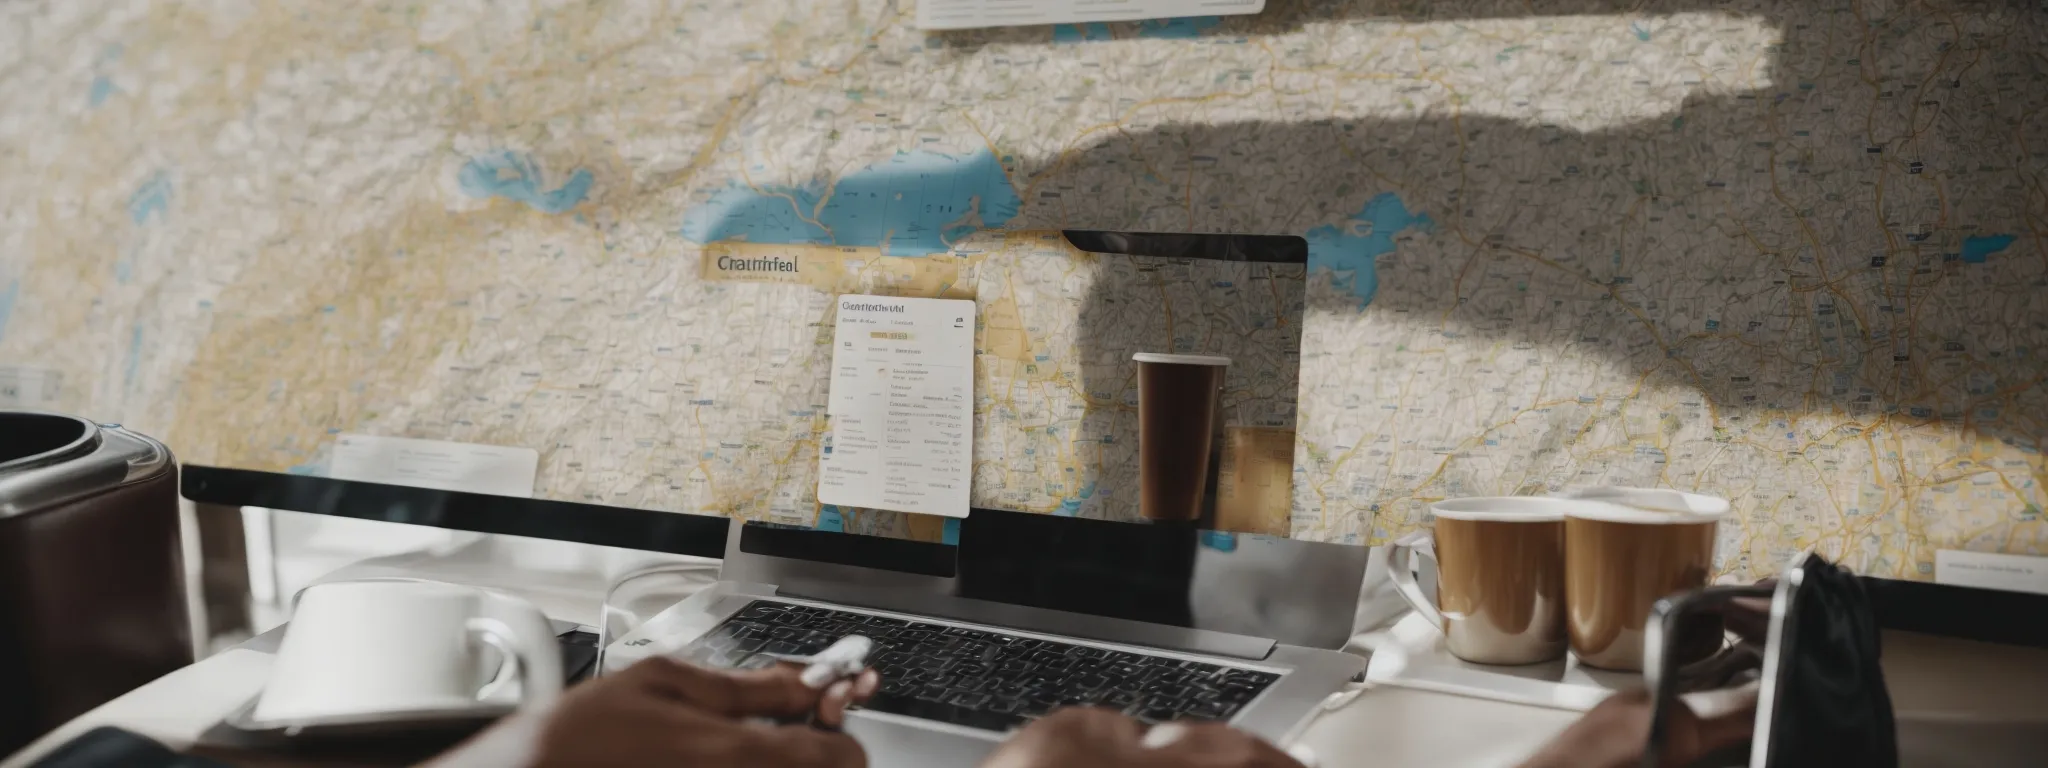 a person sitting at a cafe table with a laptop, a cup of coffee, and a city map spread out in front of them.